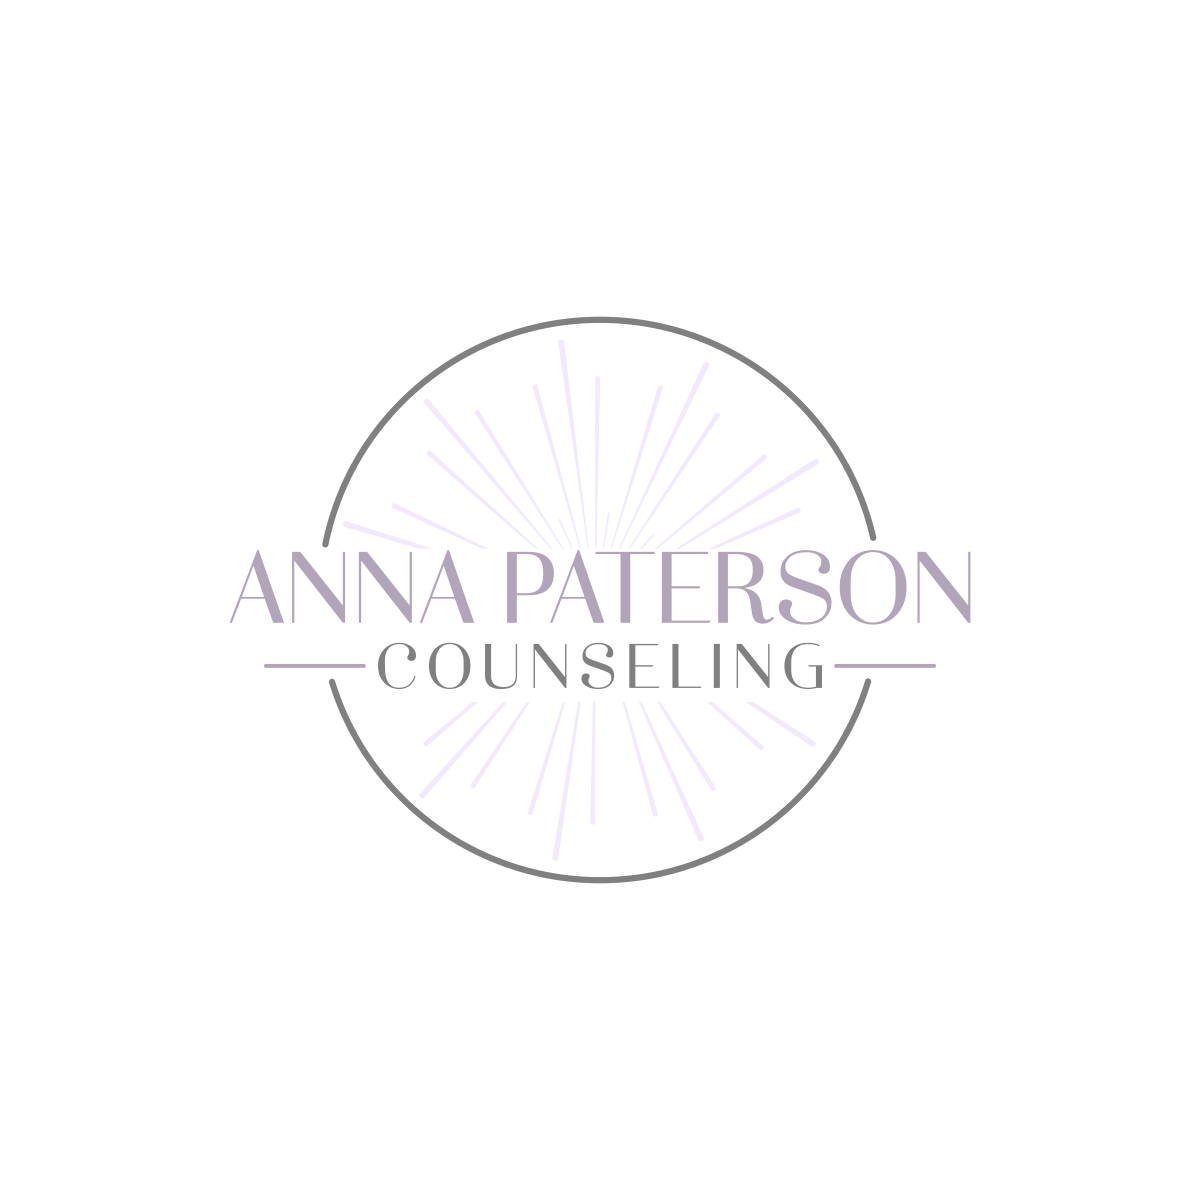 Anna Paterson Counseling 